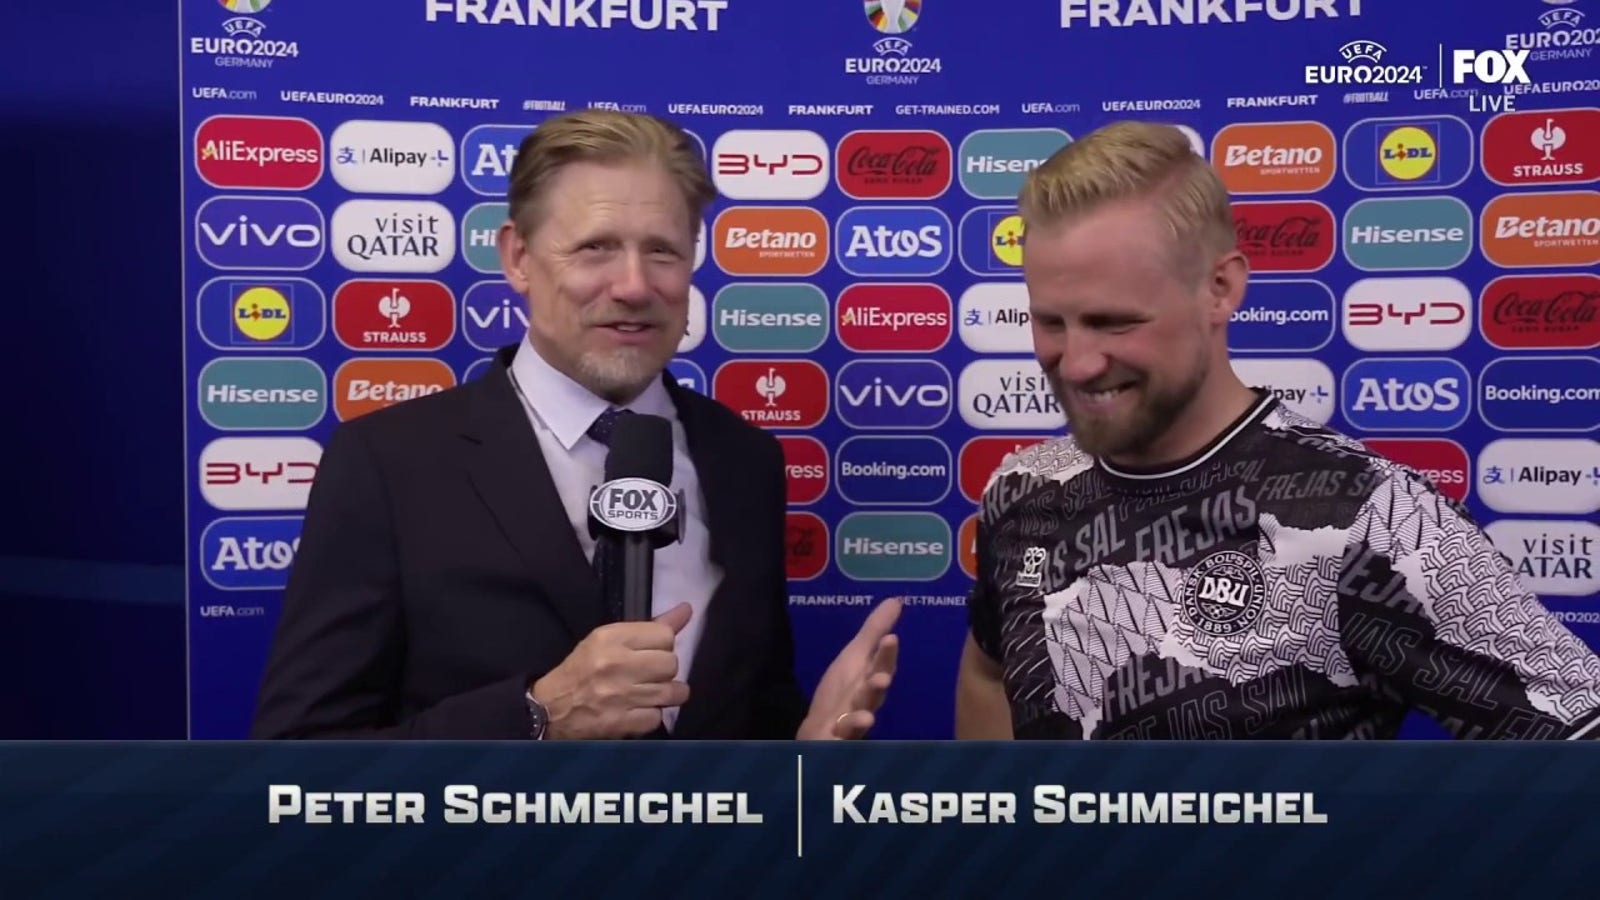 'I'm very proud' – Kasper Schmeichel is interviewed by his father Peter